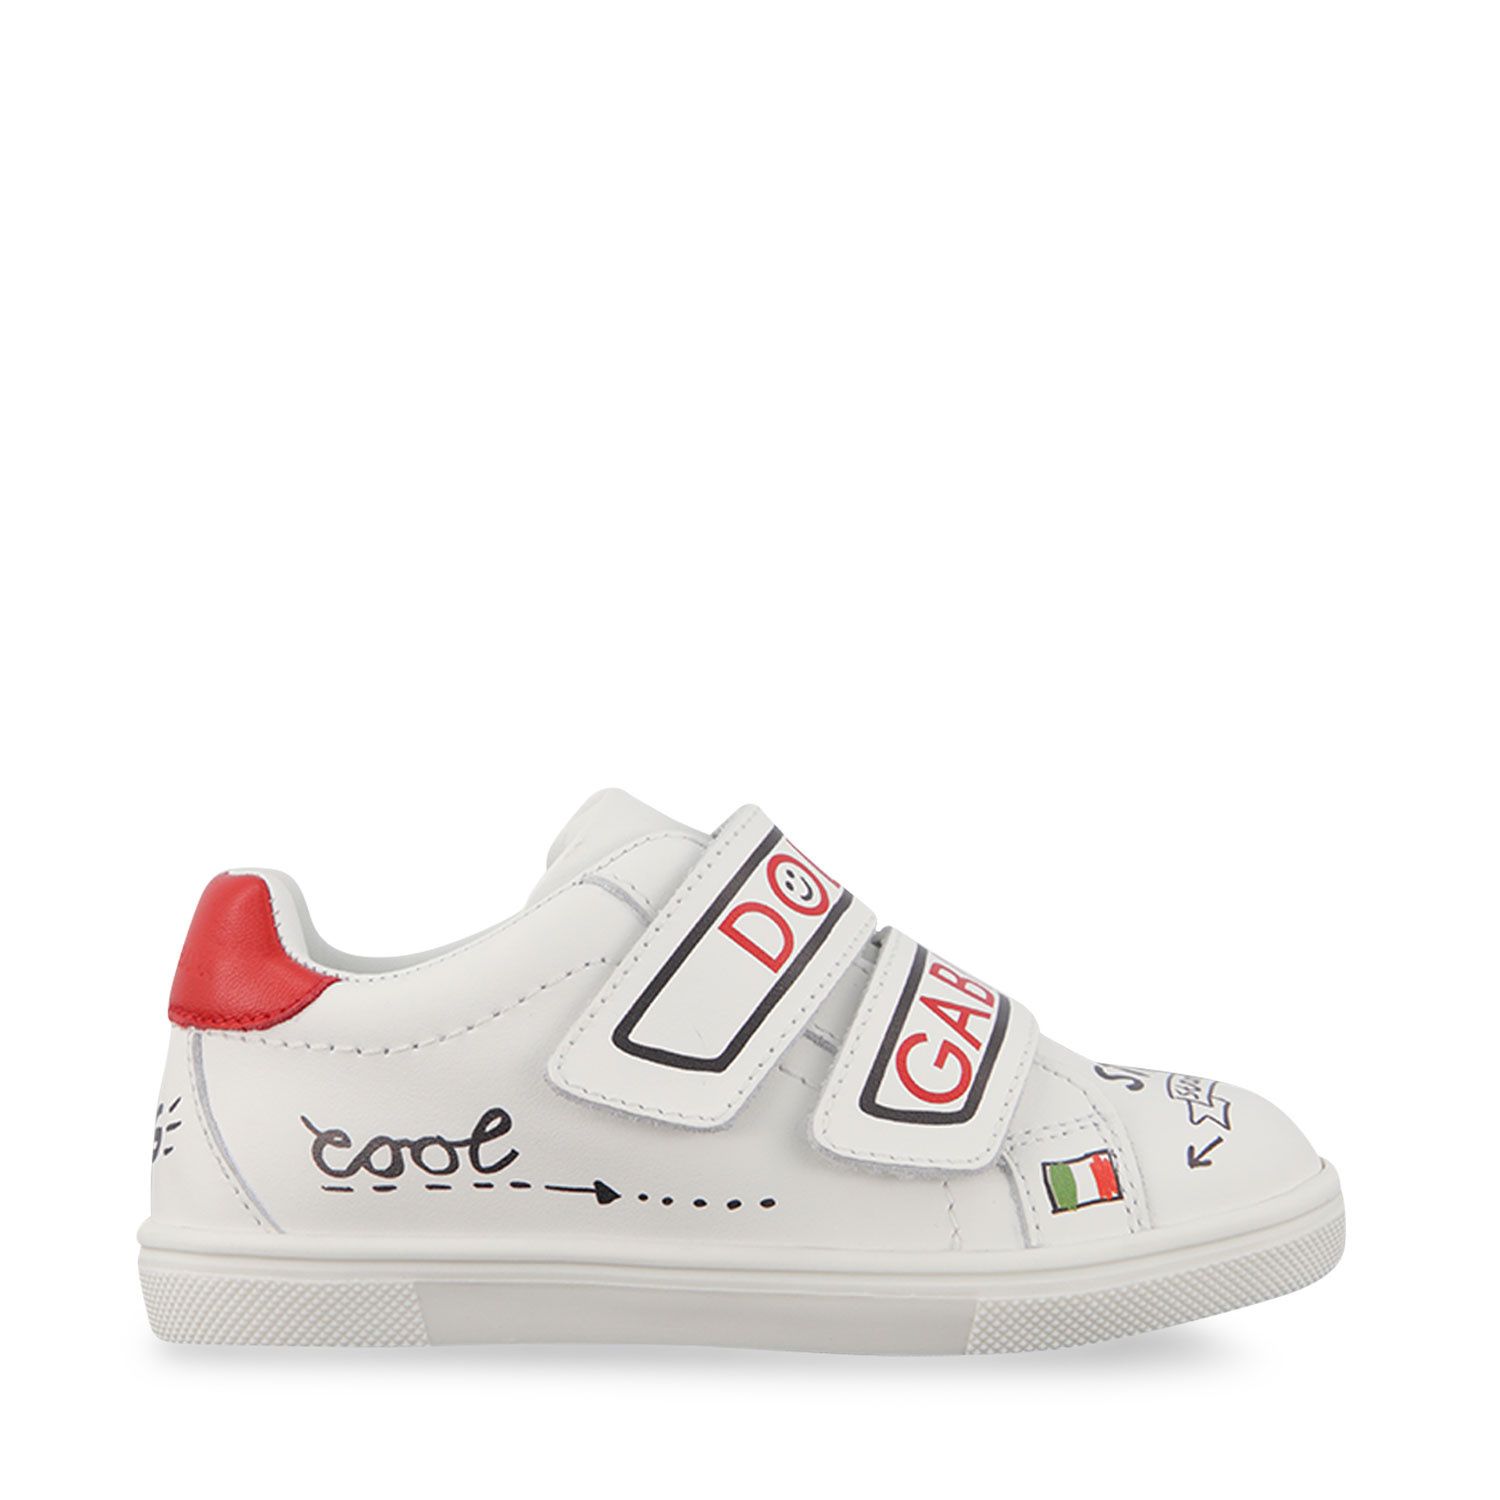 dolce and gabbana toddler sneakers